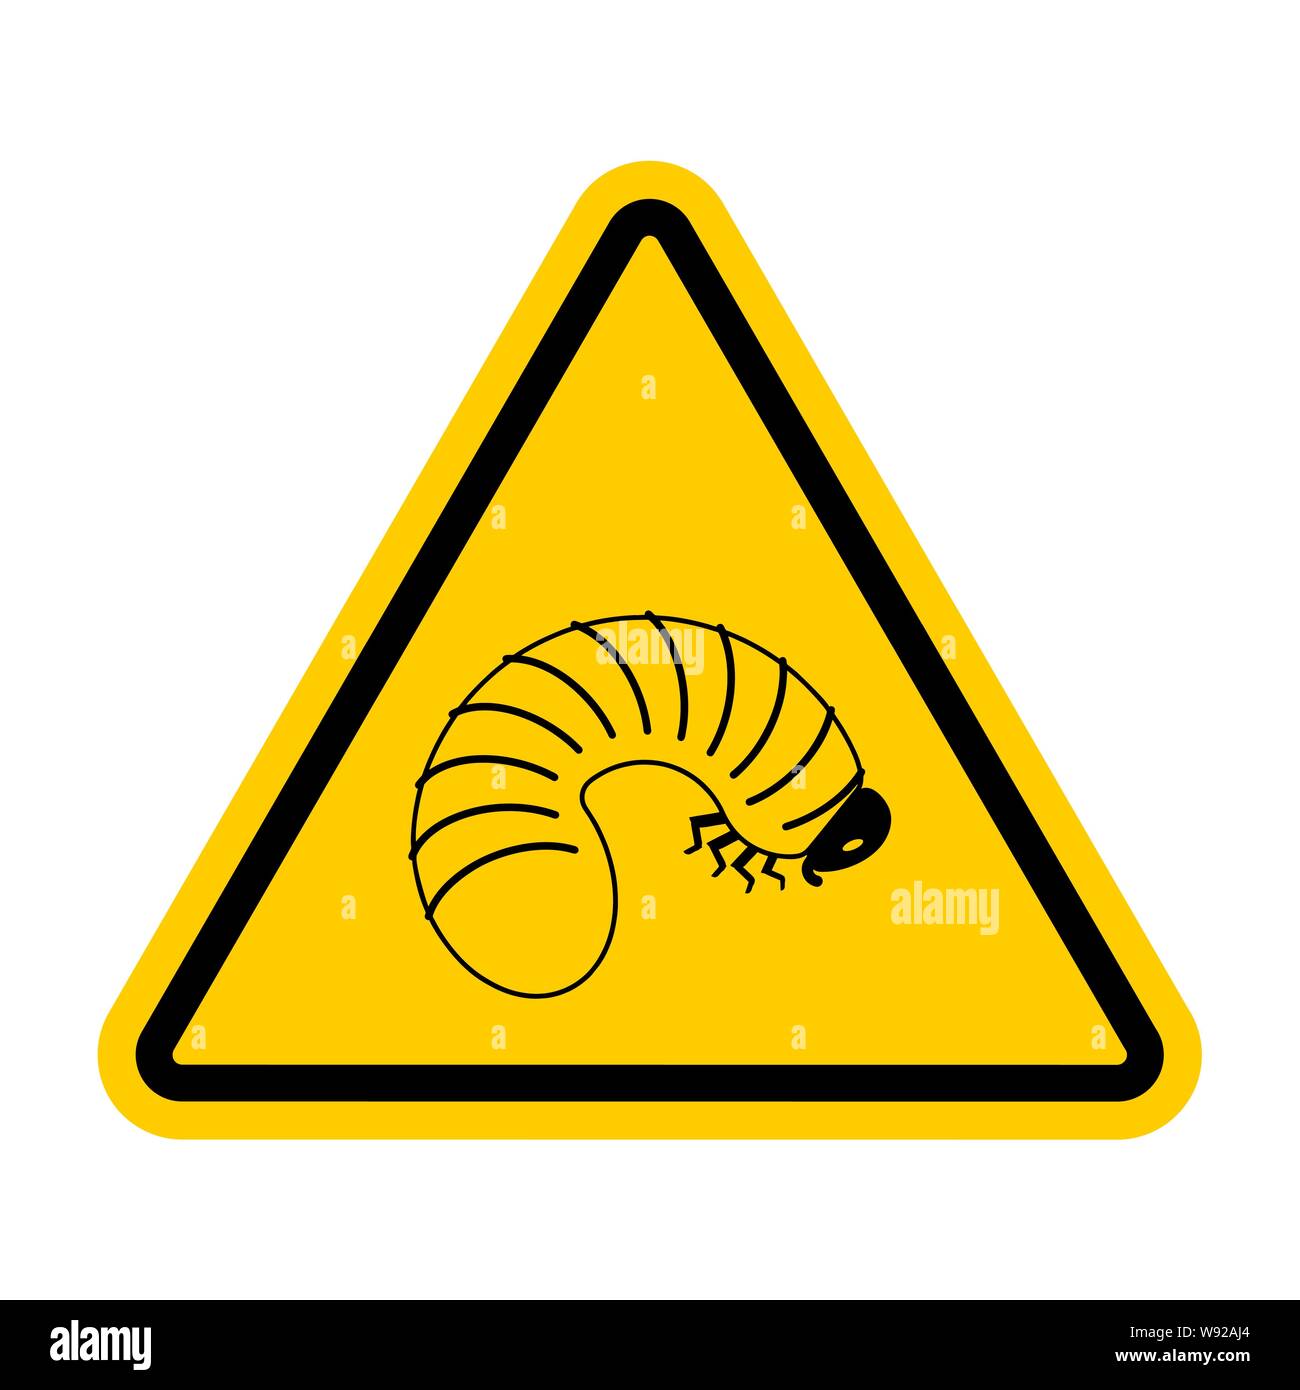 Attention Beetle larva. Caution Maggot. Red triangle road sign Stock Vector